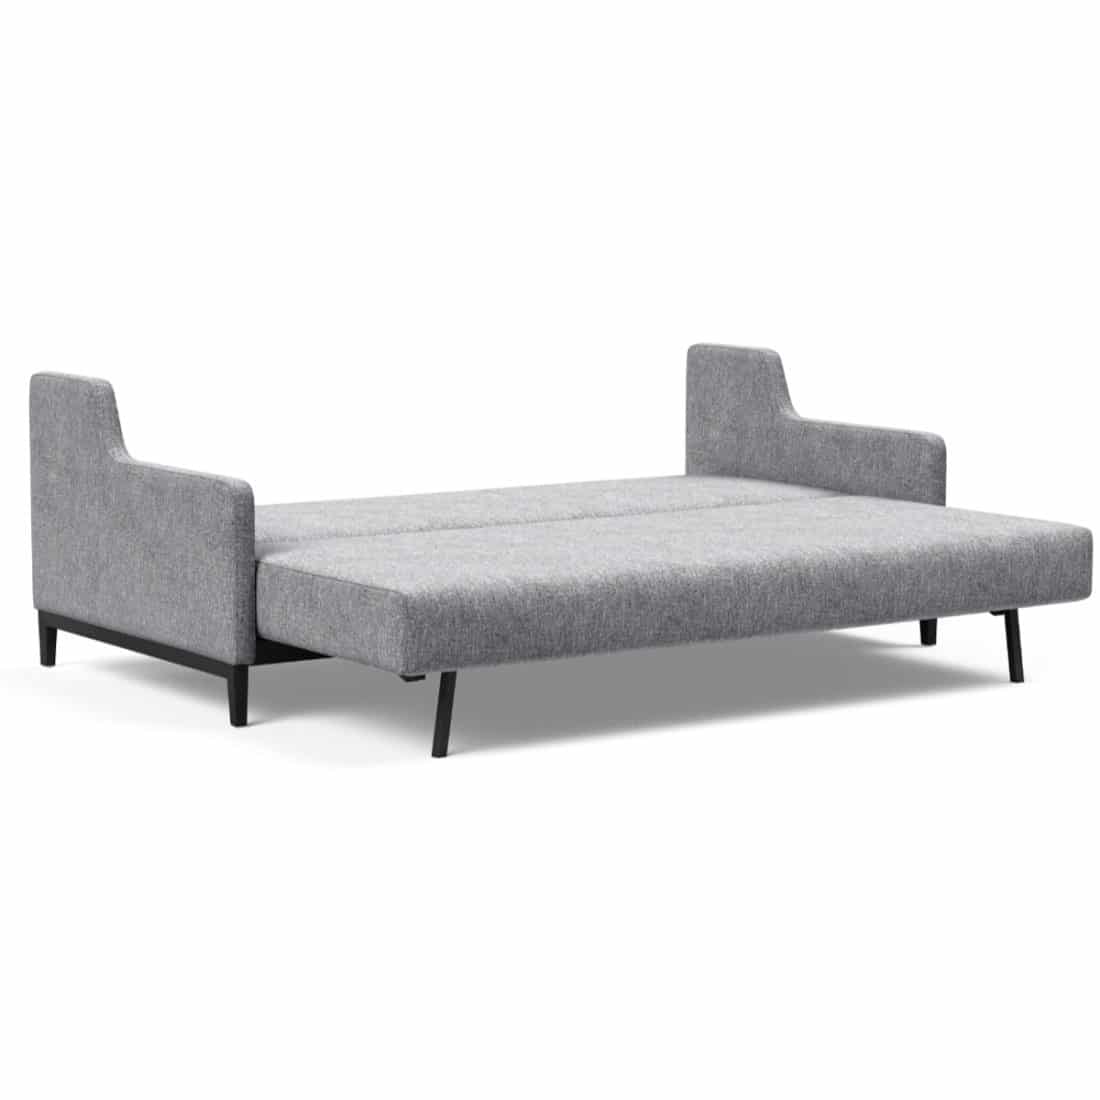 Trp Post Container Data Trp Post ID 23677 Showroom Model Sofa Bed Hermod 160 x 200 Trp Post Container